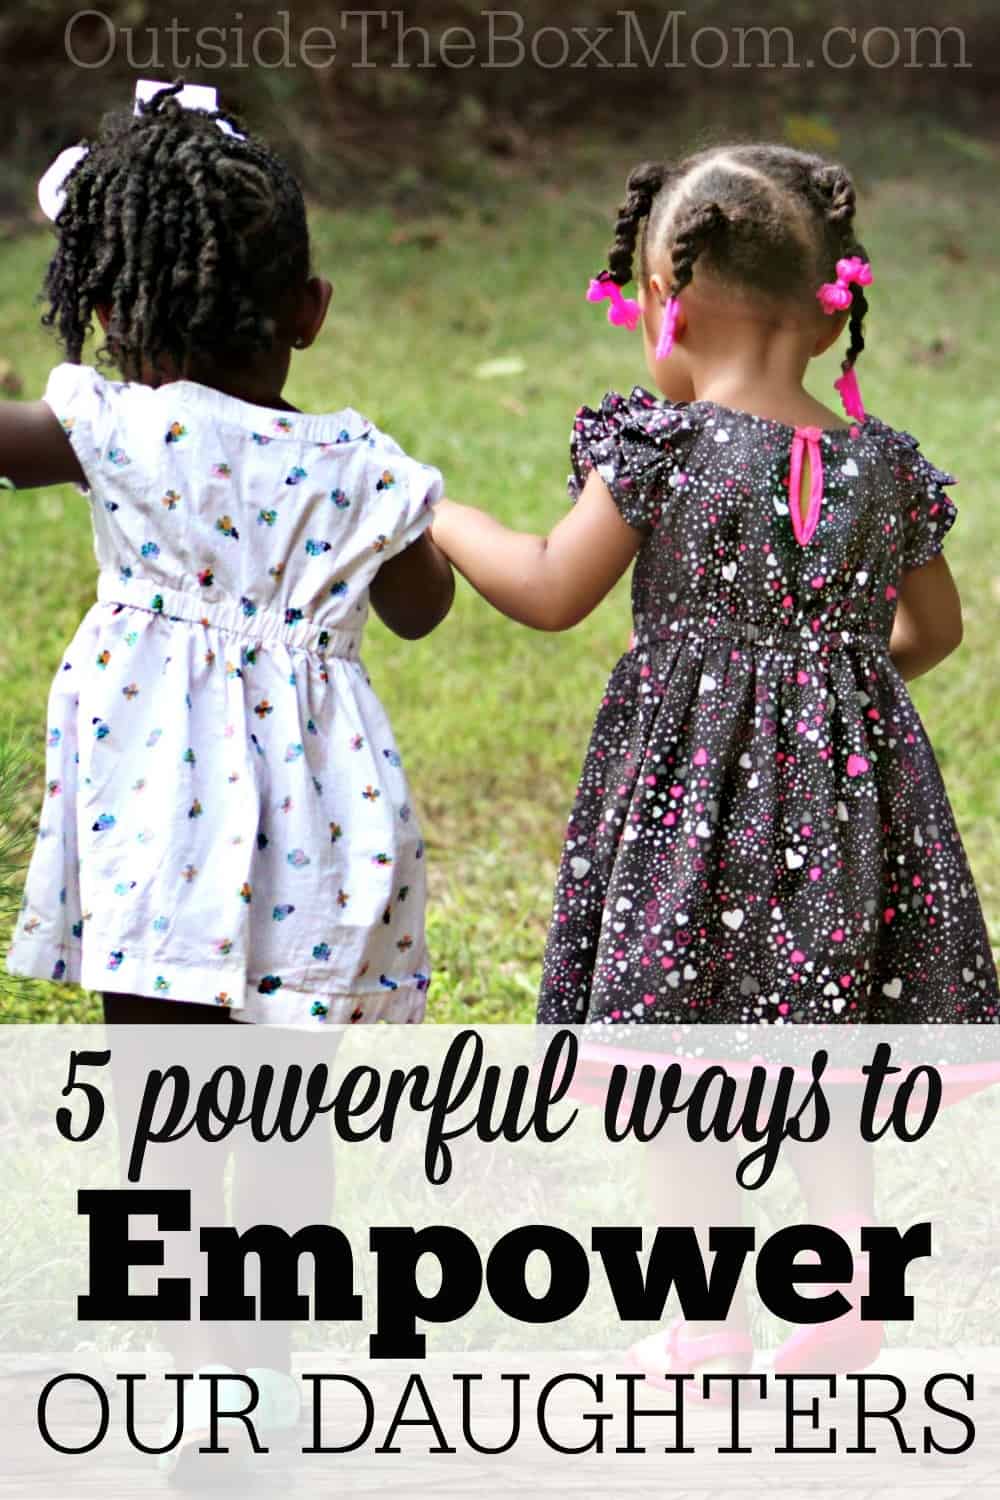 Daughters become not only the wives and mothers of the world, but also the teachers, CEOs, and presidents. Learn about five powerful ways that you can empower your daughter today.